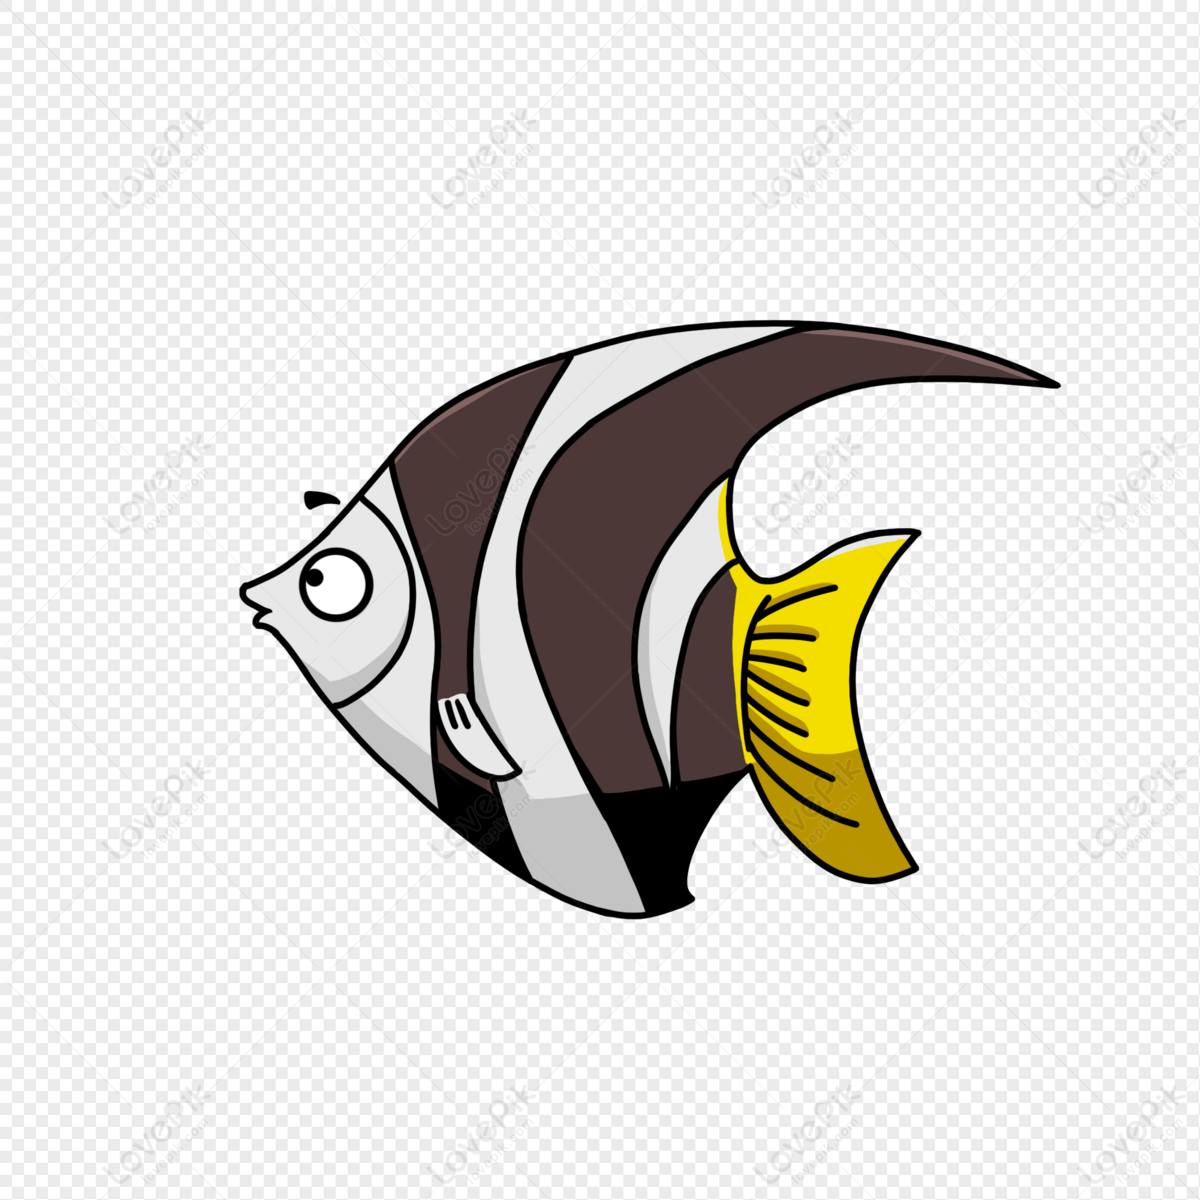 Cartoon Hand Drawn Ocean Fish PNG Image And Clipart Image For Free Download  - Lovepik | 401389858